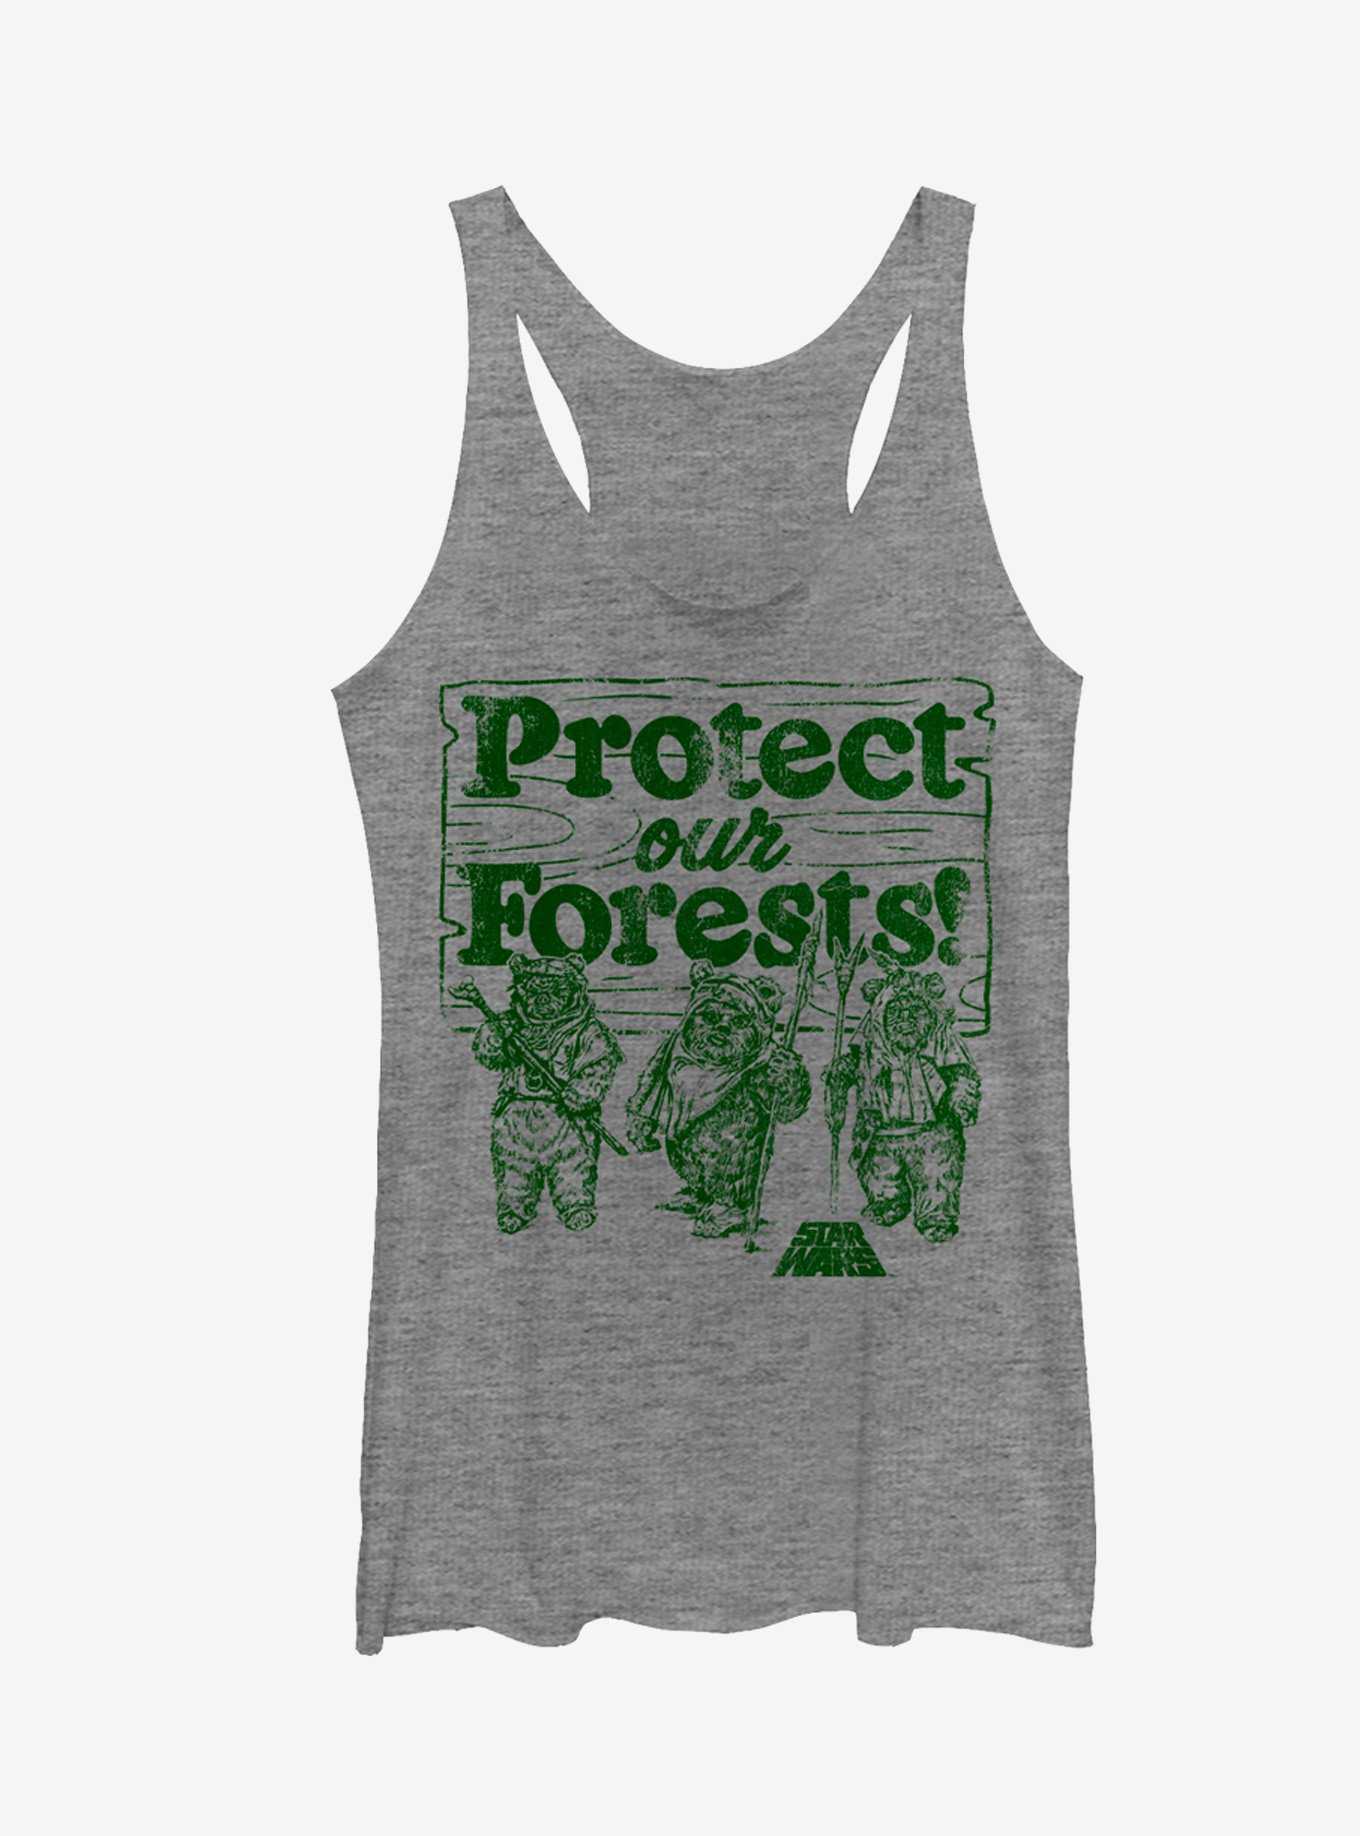 Star Wars Ewok Protect Our Forests Girls Tanks, , hi-res